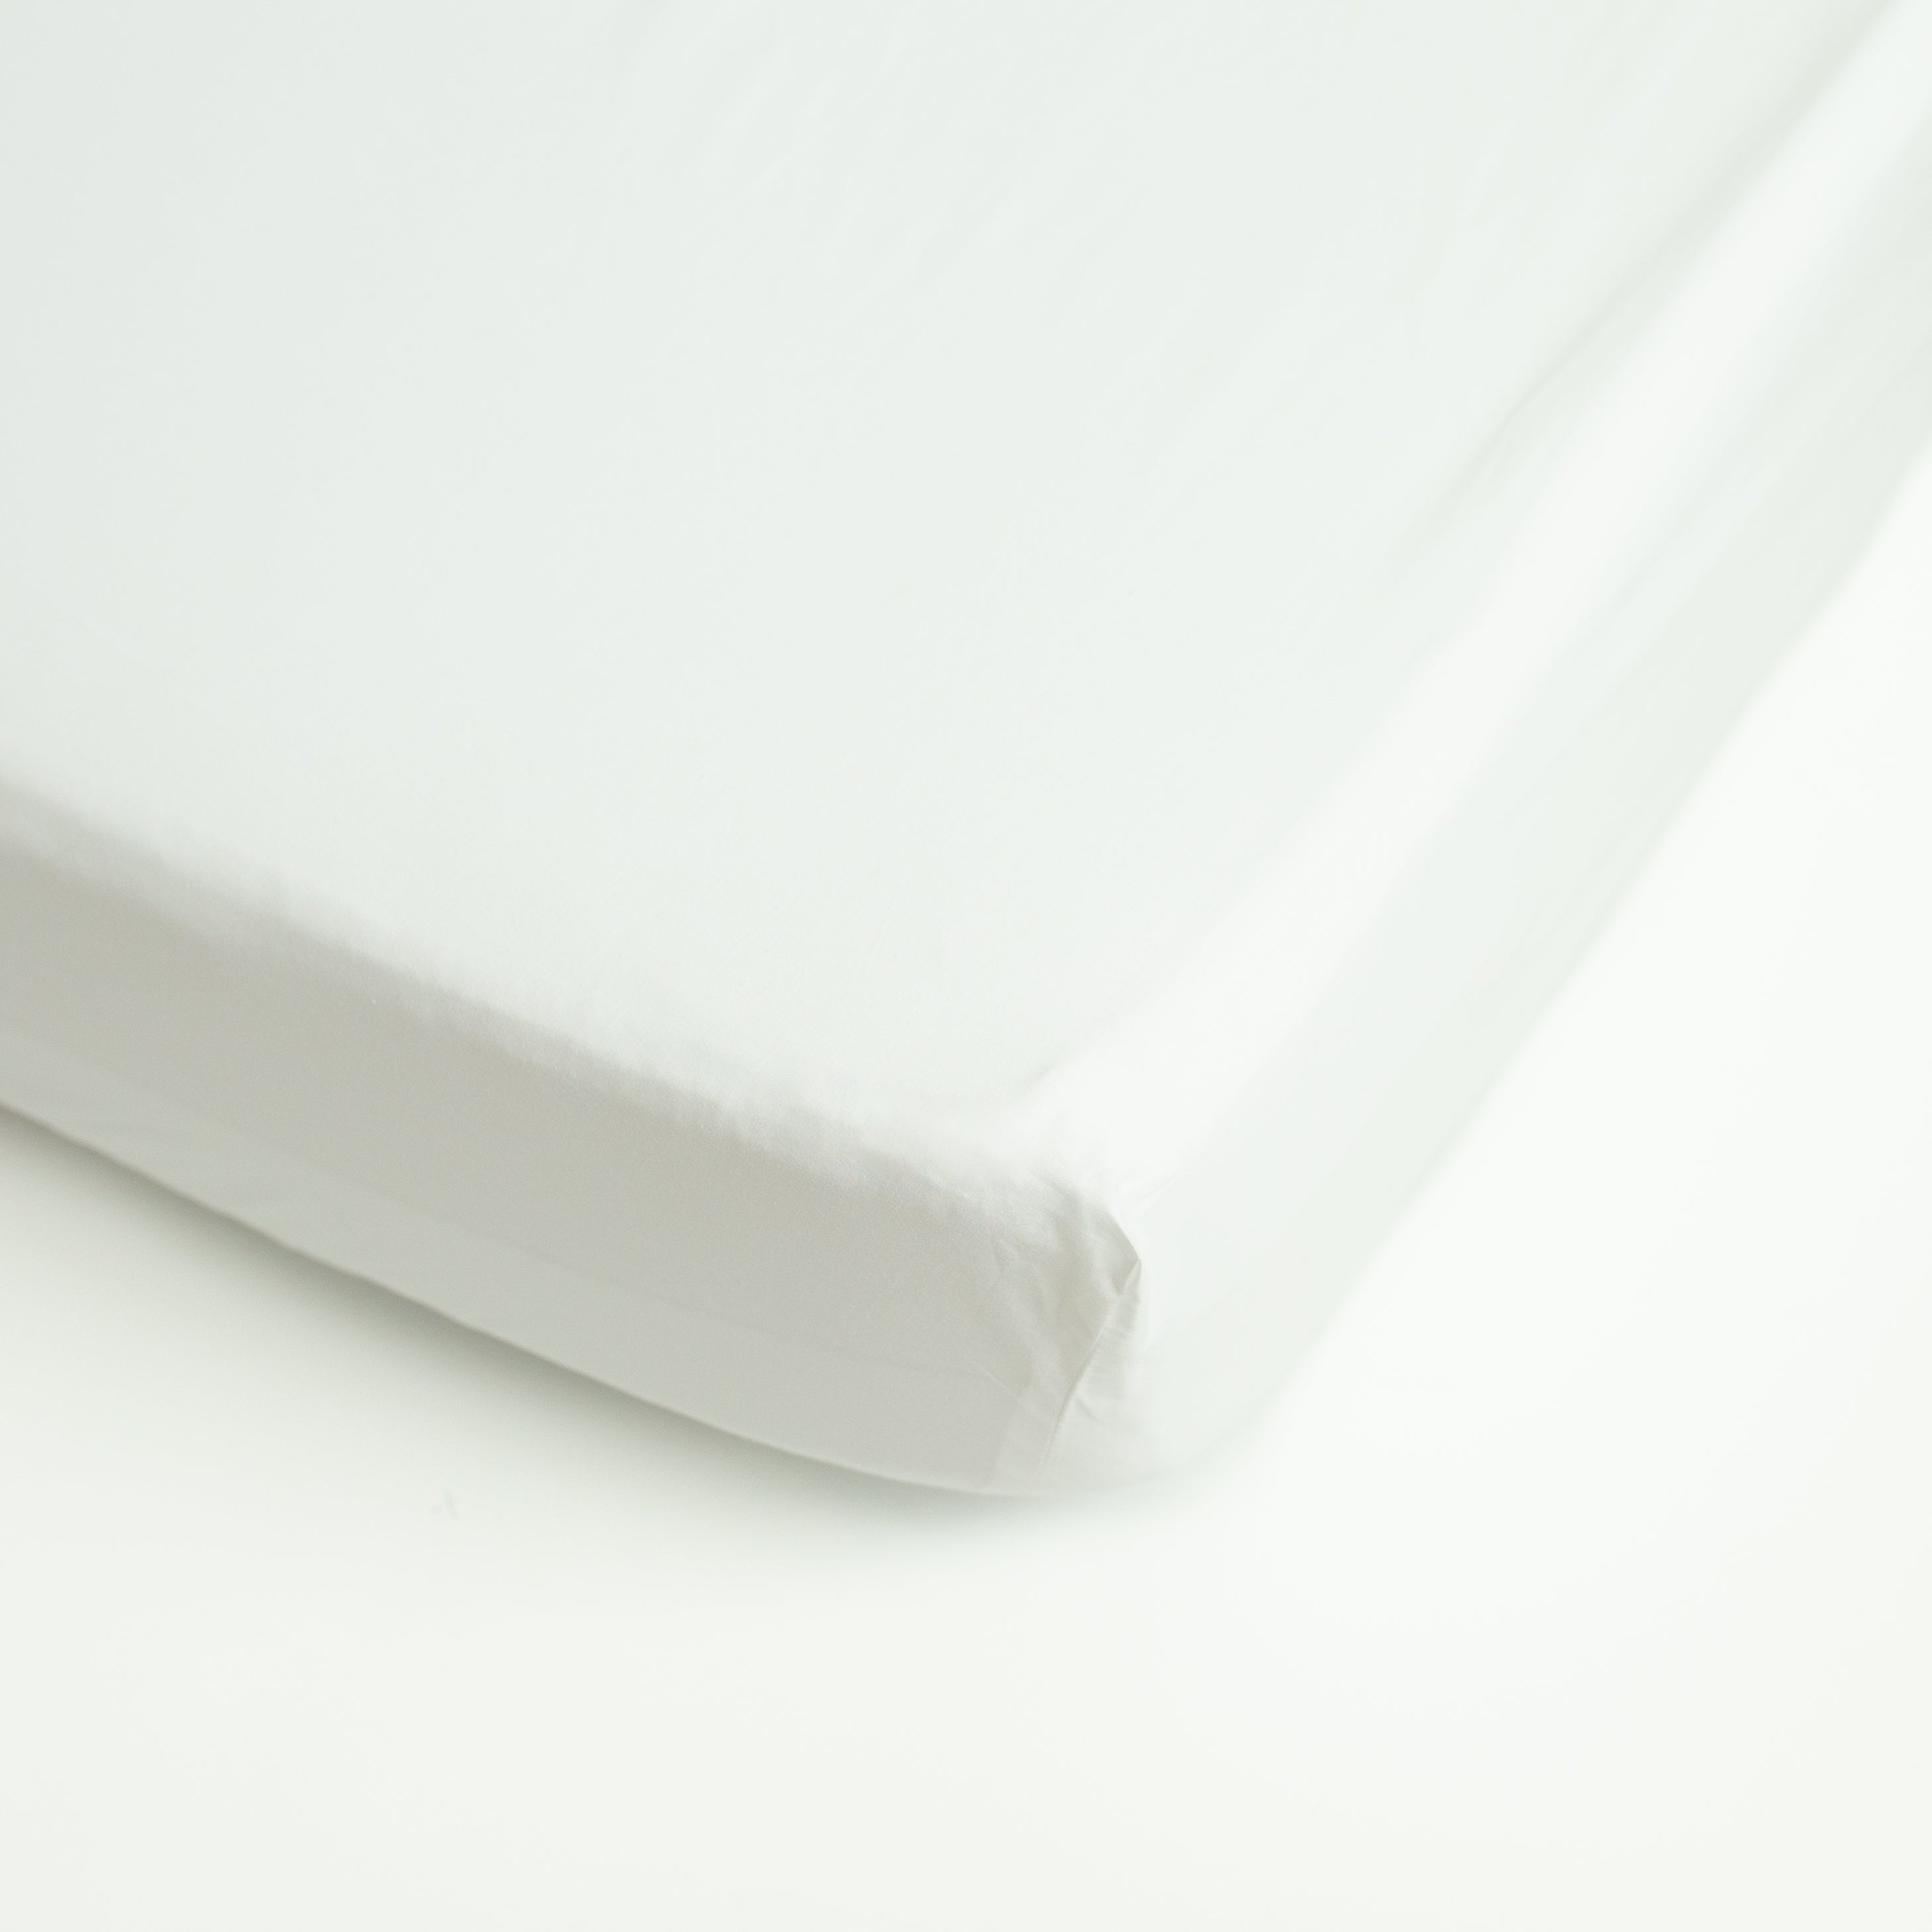 A detail view showing the soft texture of an Oolie deep fitted sheet in white cotton installed on a bed.